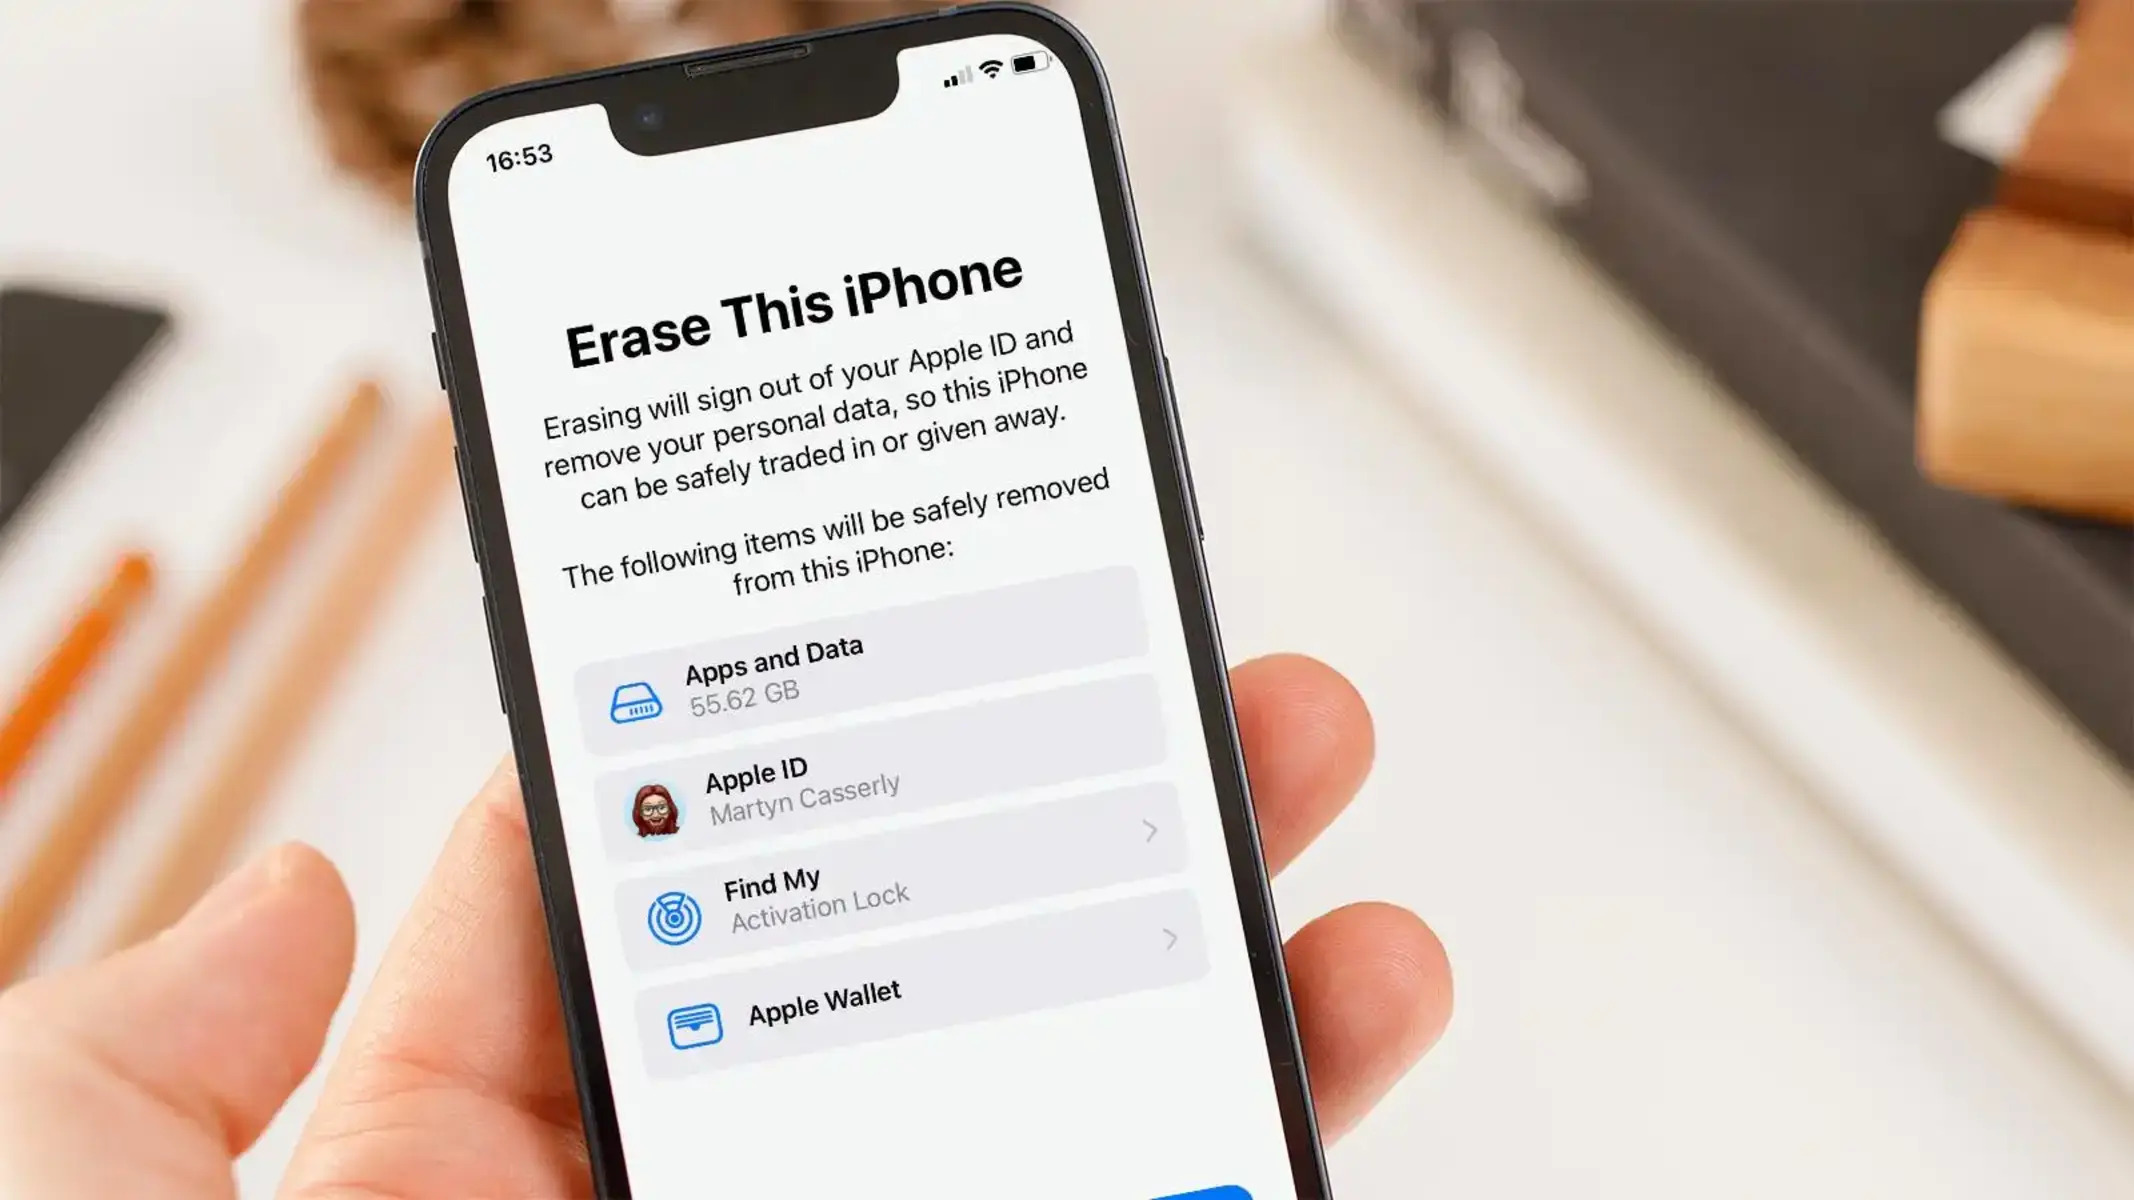 How To Erase Your IPhone Settings And Data